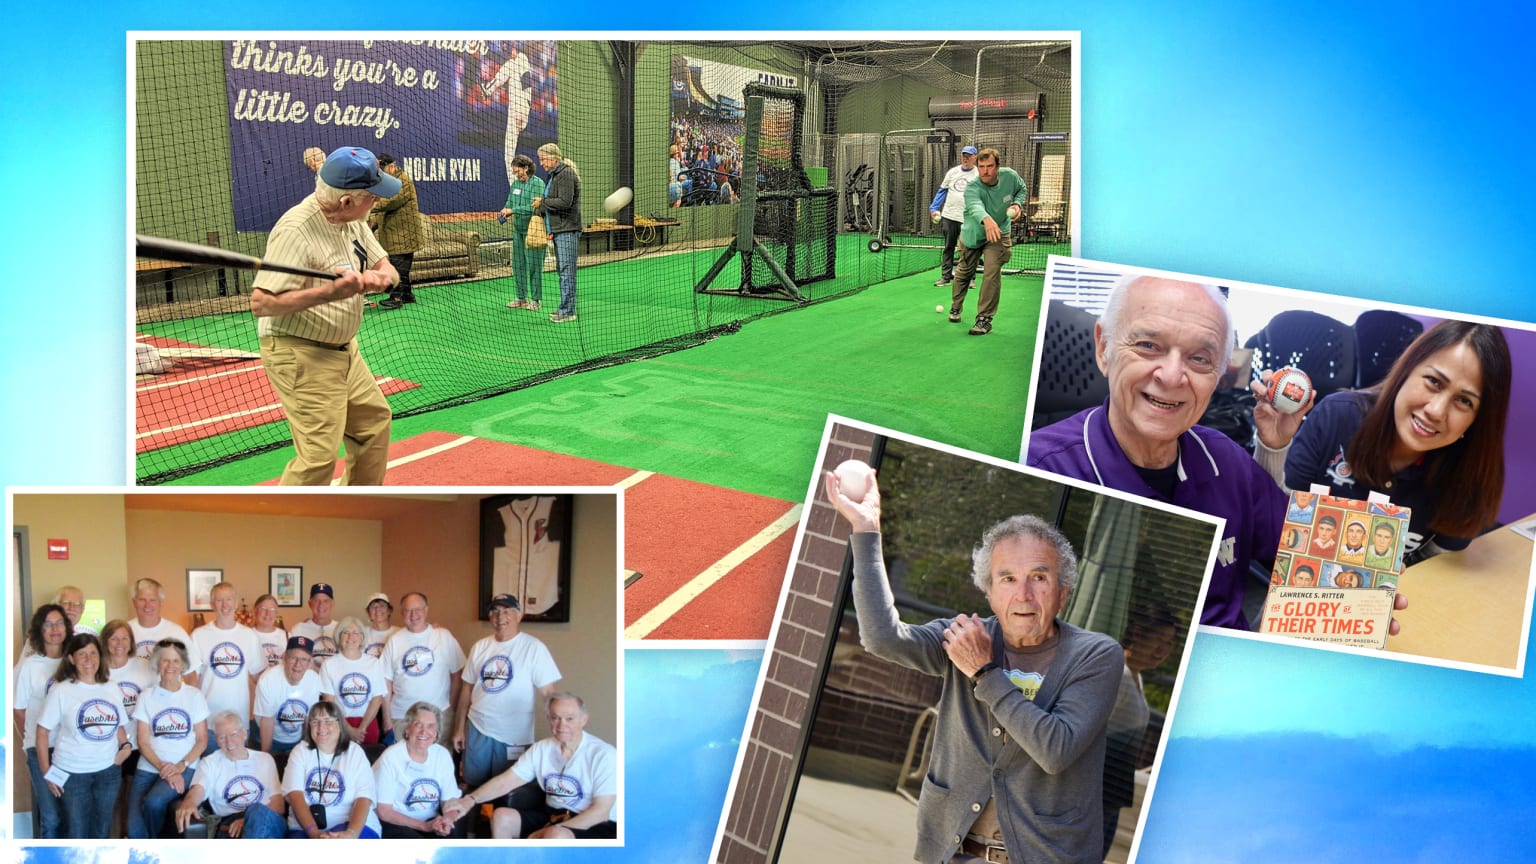 A collage of 4 images showing older people holding baseballs, in a batting cage and posing for a group picture